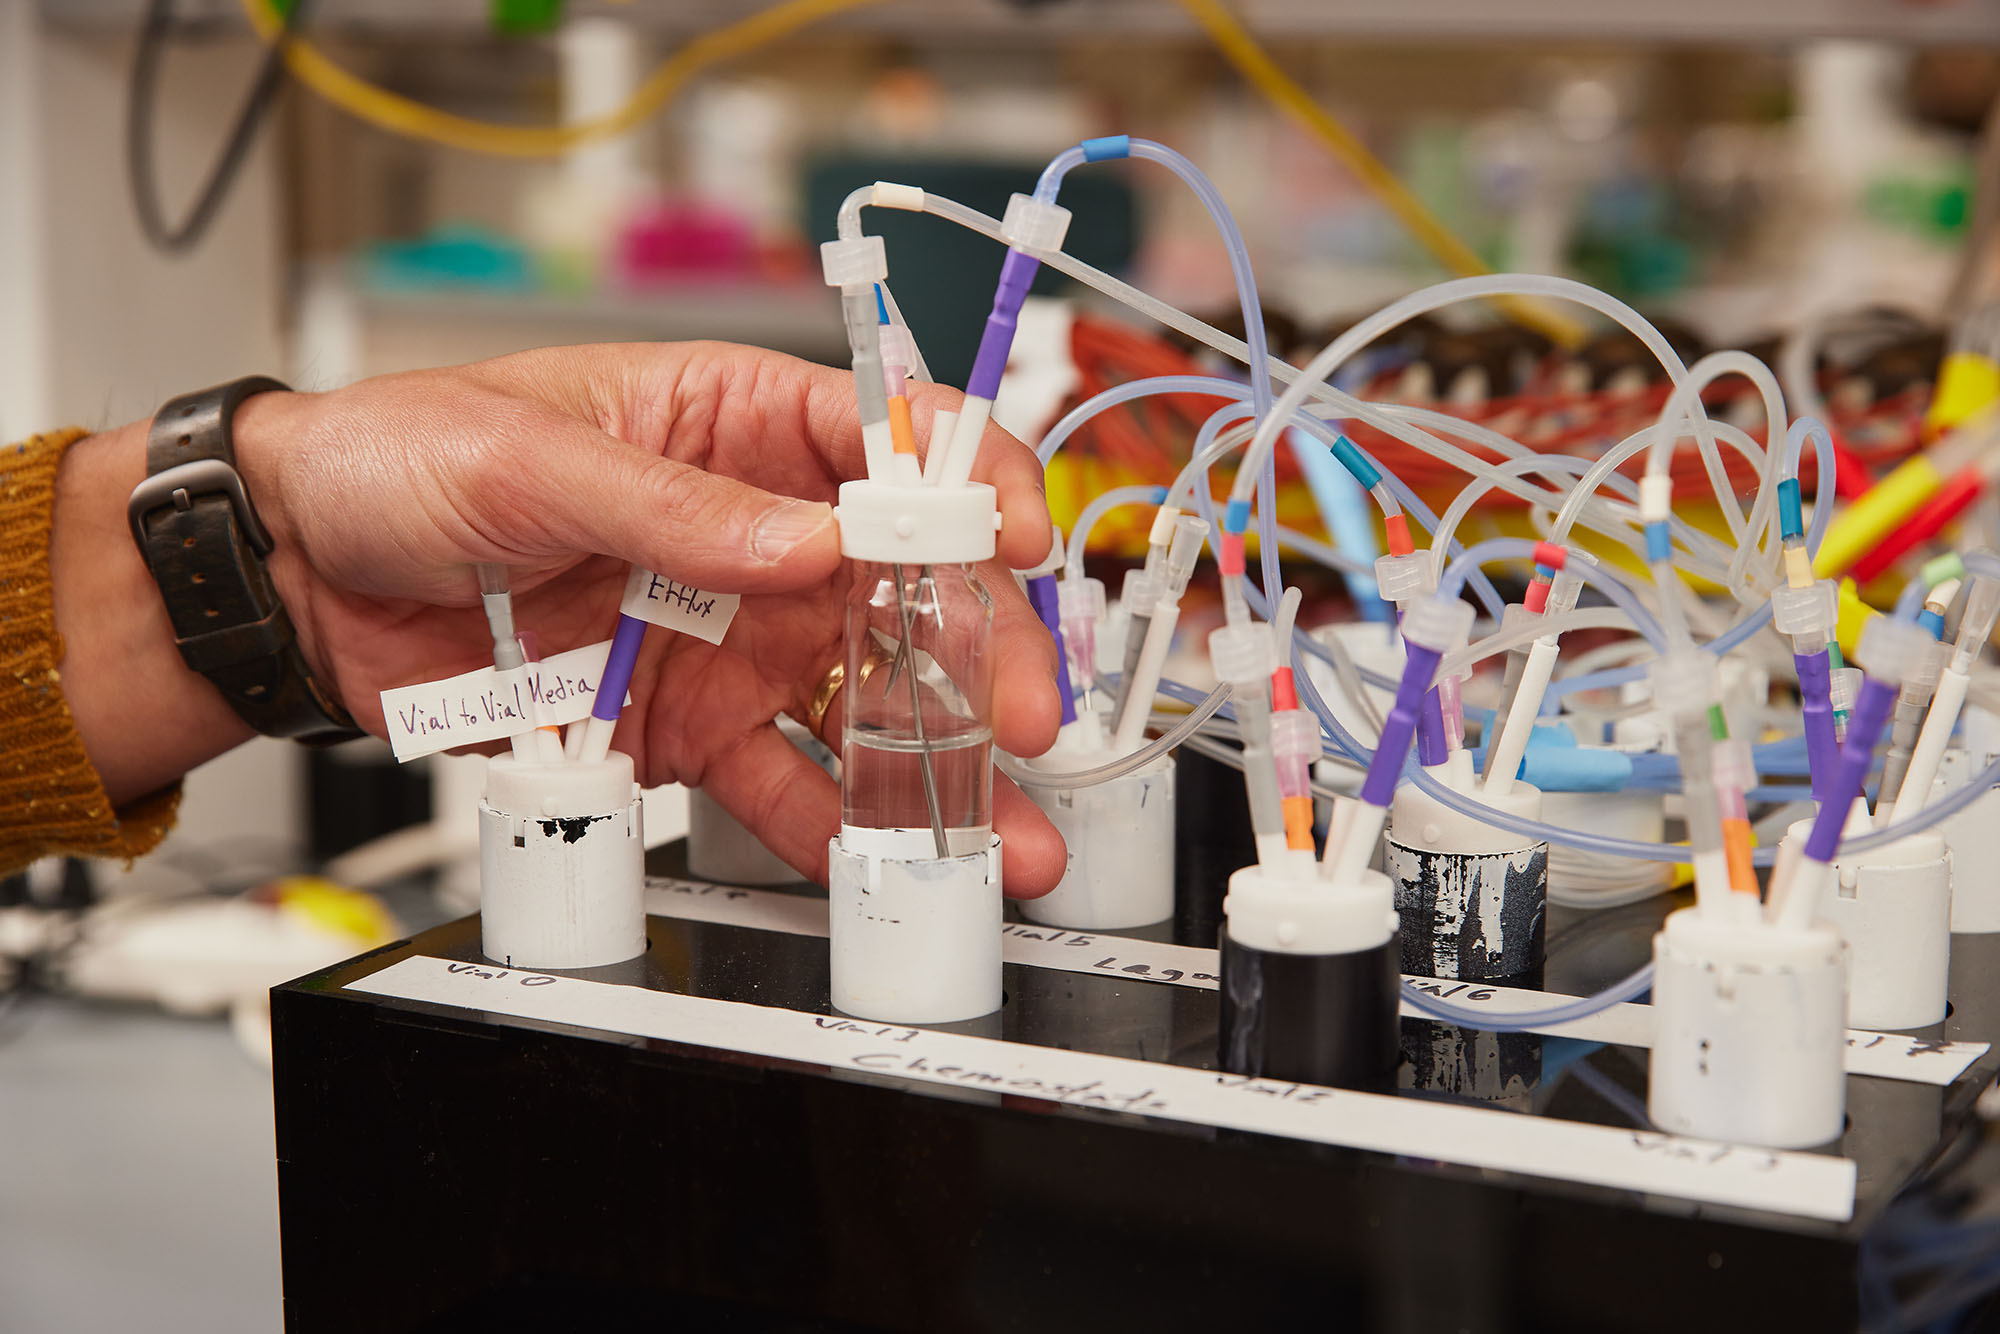 Photo: A hand shows off a test tube with many multicolored wires attached to it in a lab.